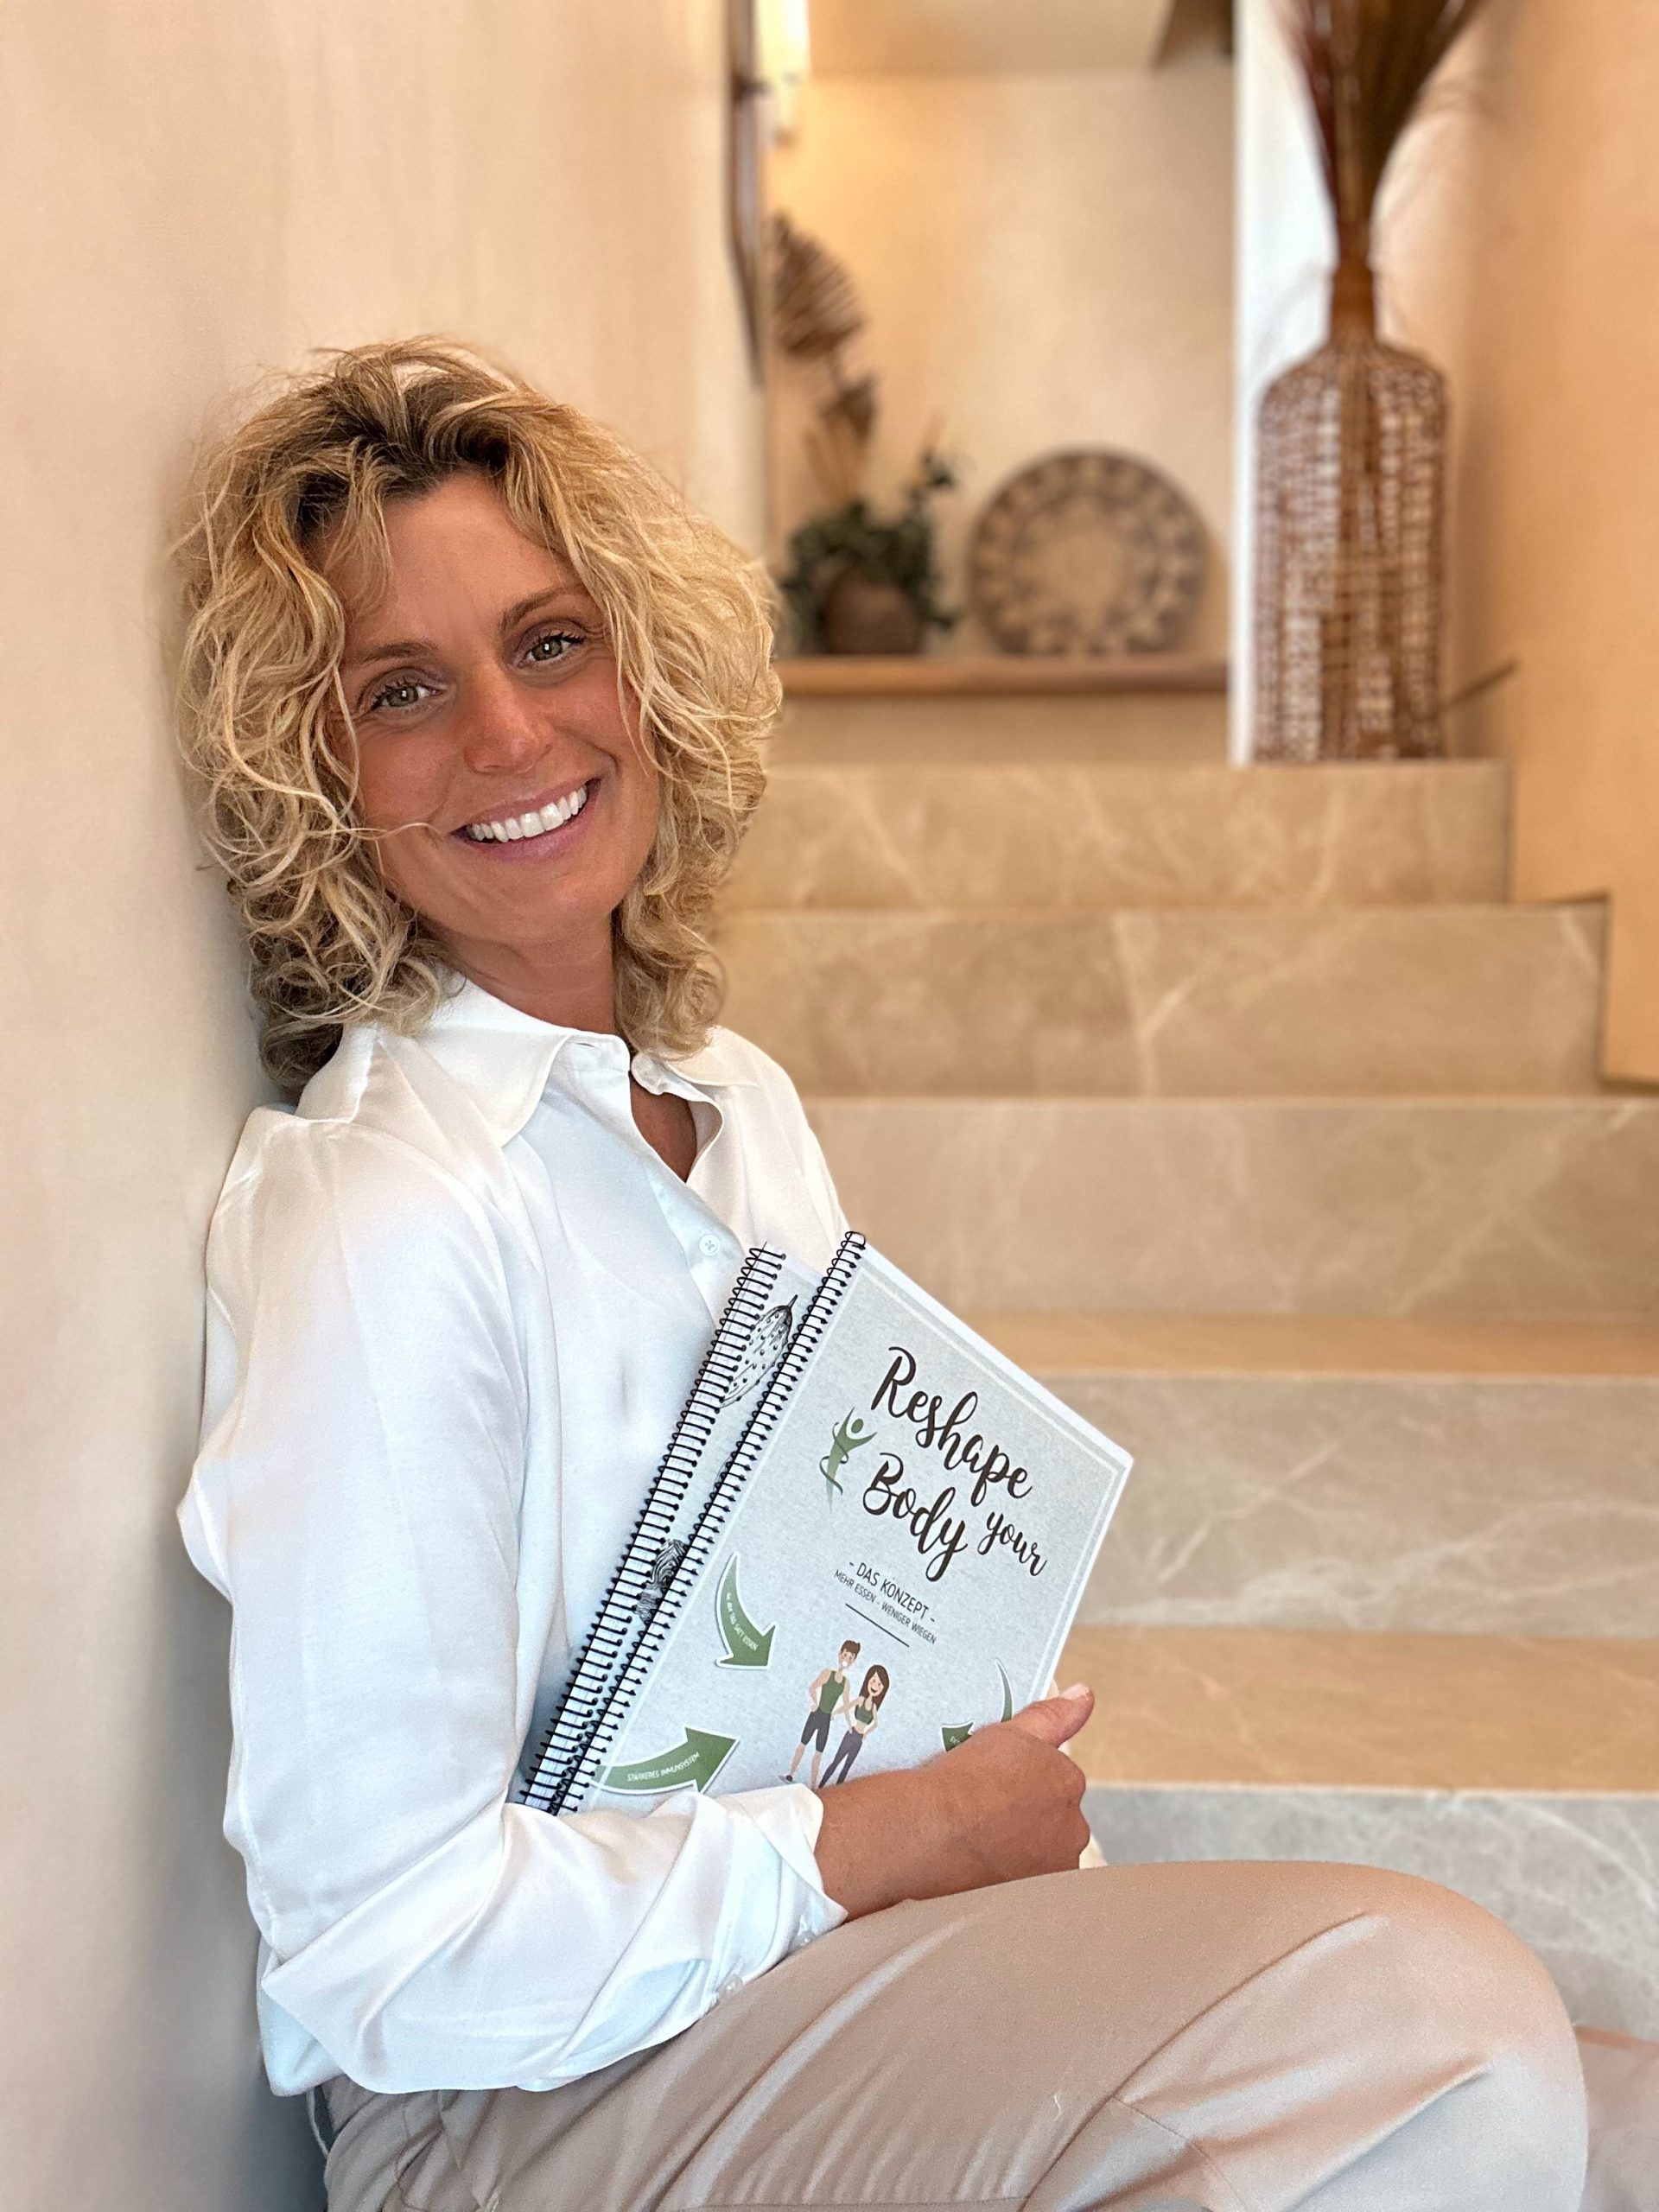 Claudia Berger on how she holds the Reshape your Body concept and Reshape your Body cookbook